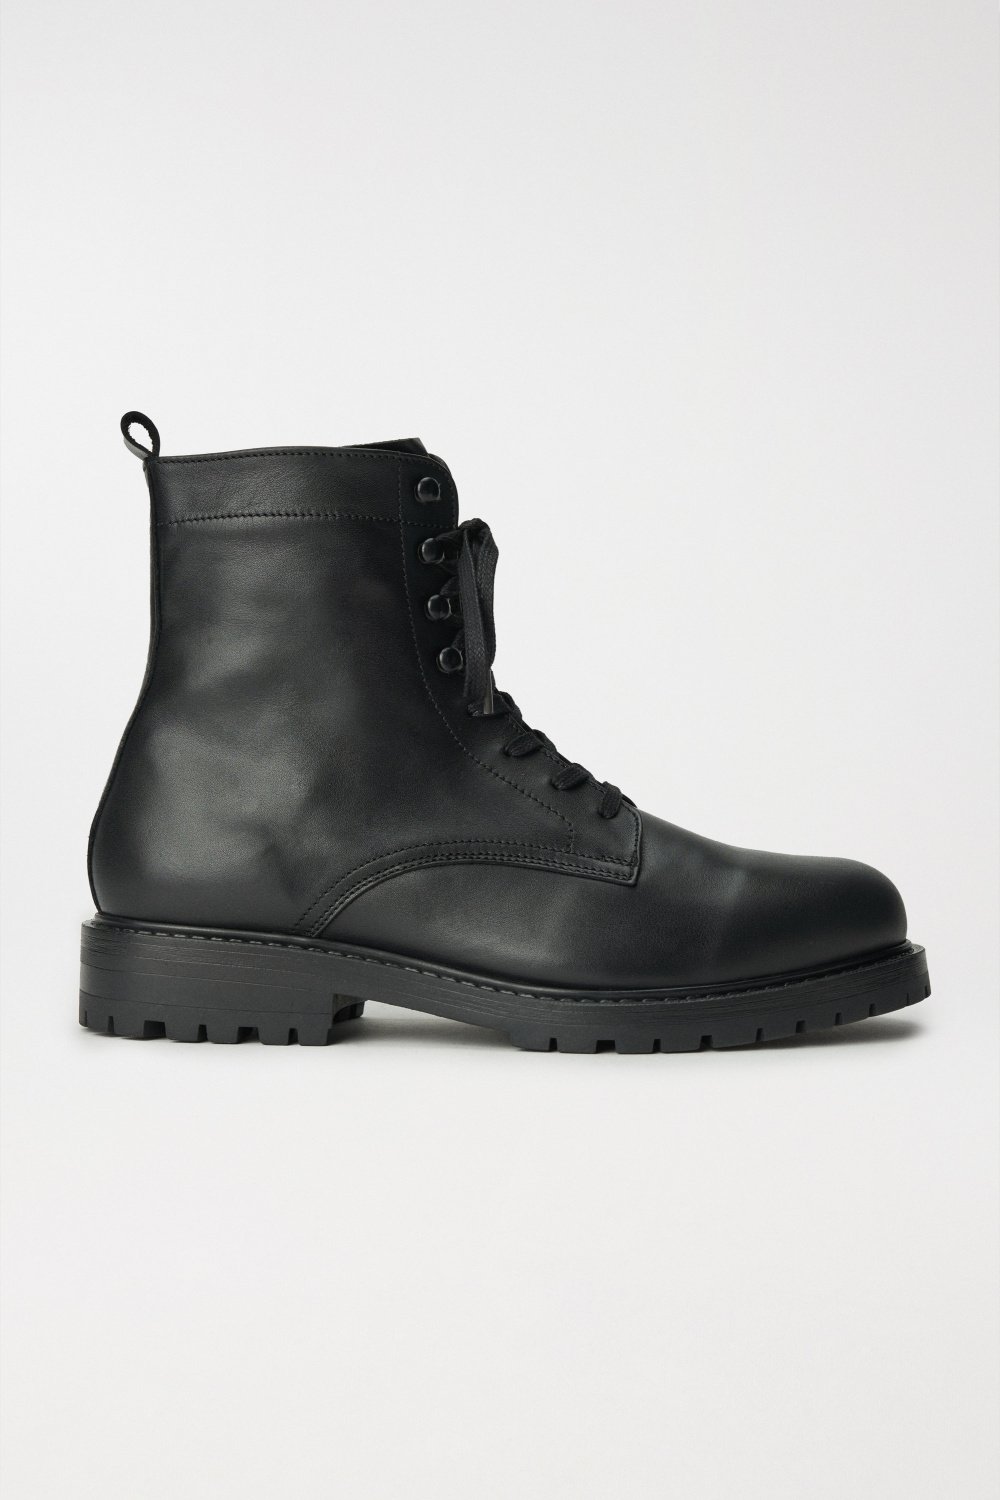 LEATHER MILITARY BOOTS - Salsa